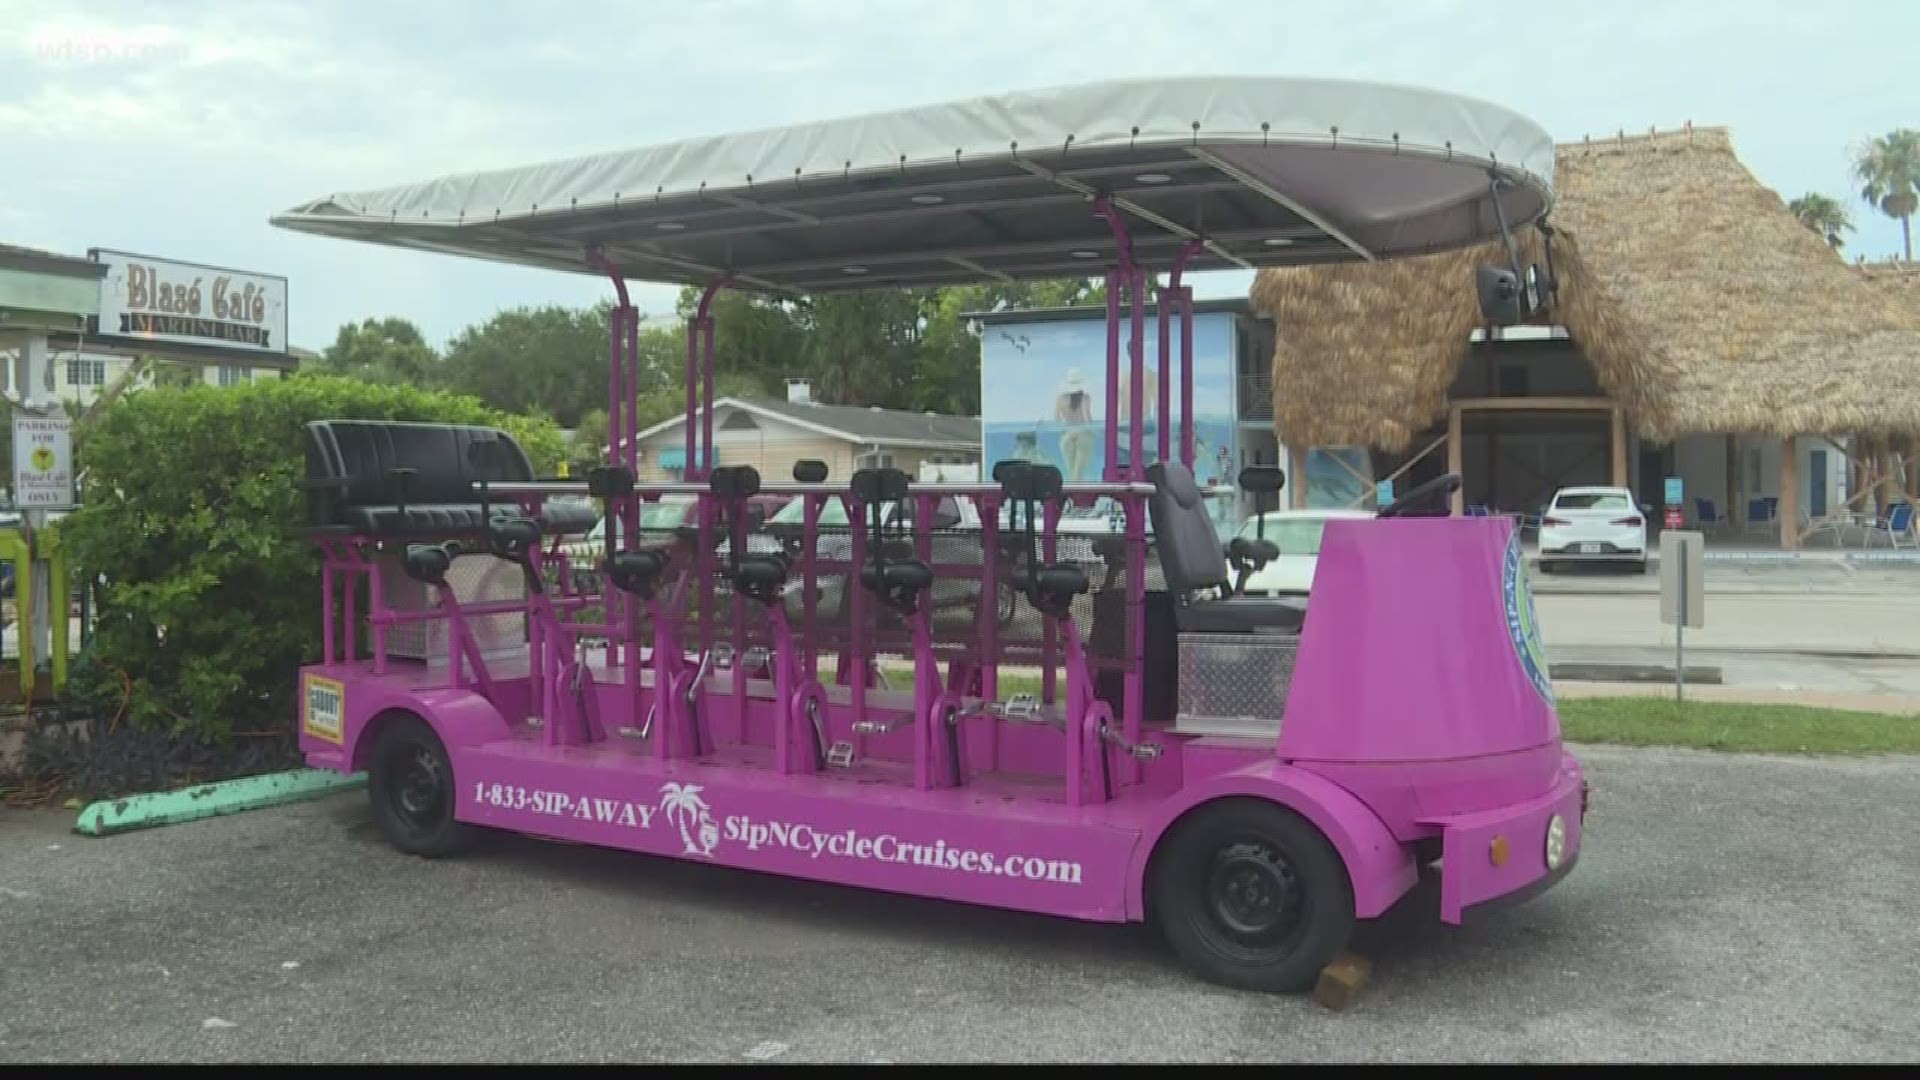 Forget scooters -- in Sarasota, people are talking about these party bikes. City commissioners voted to design an ordinance that would allow these to be legal on the streets.